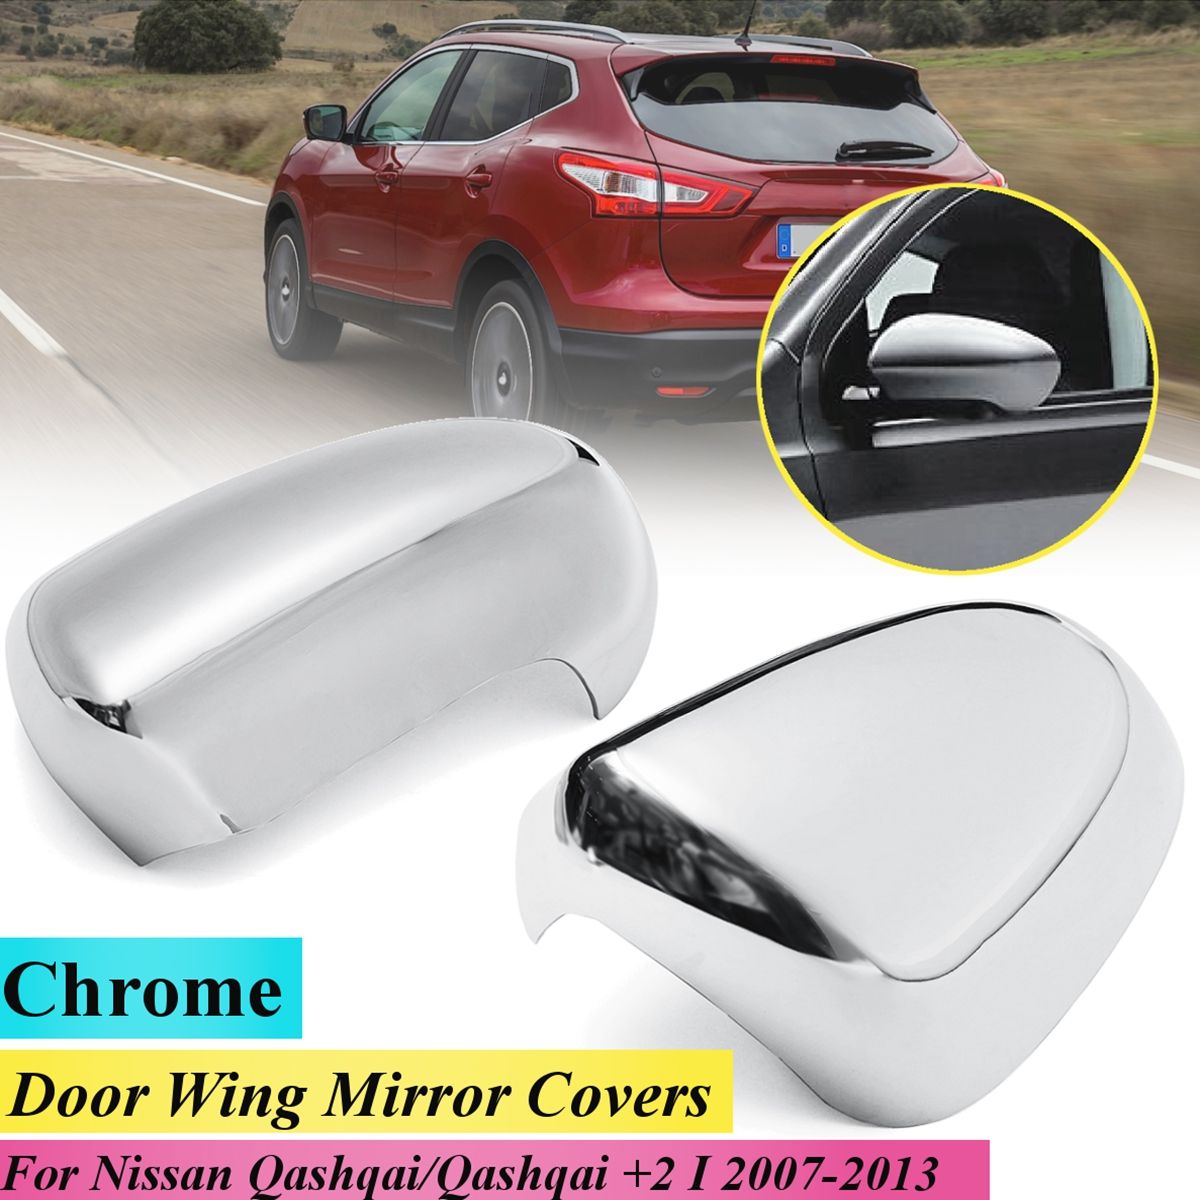 Car-Chrome-Side-Door-Wing-Mirror-Cover-Caps-Pair-for-Nissan-Qashqai-2-I-2007-2013-1465724